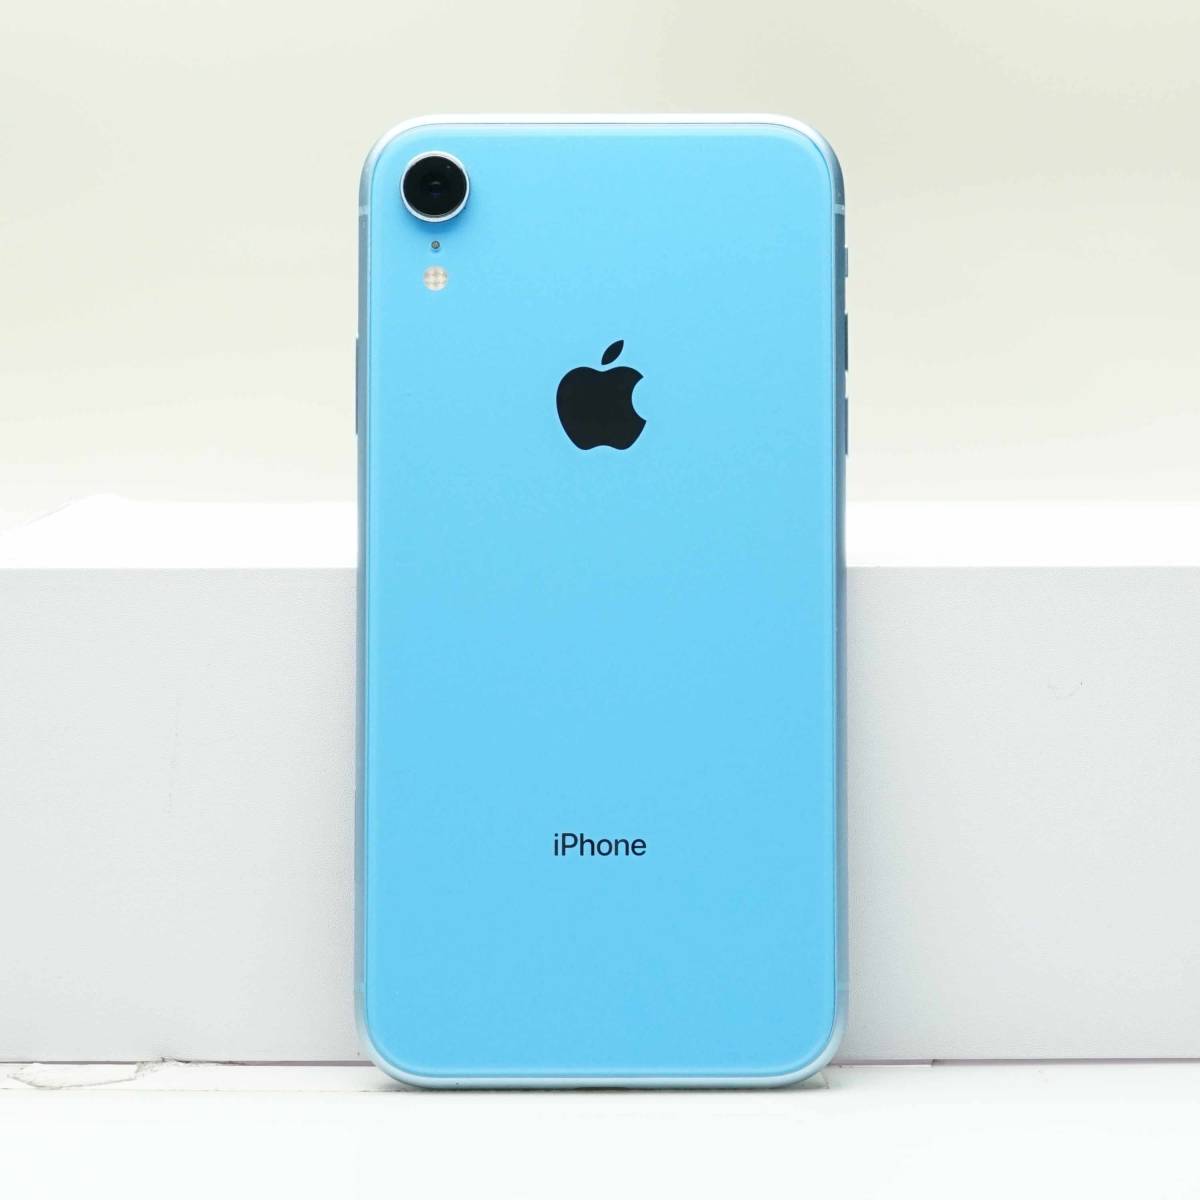 iPhone XR 128GB SIMfli- blue used body goods with special circumstances MT0U2J/A White ROM 